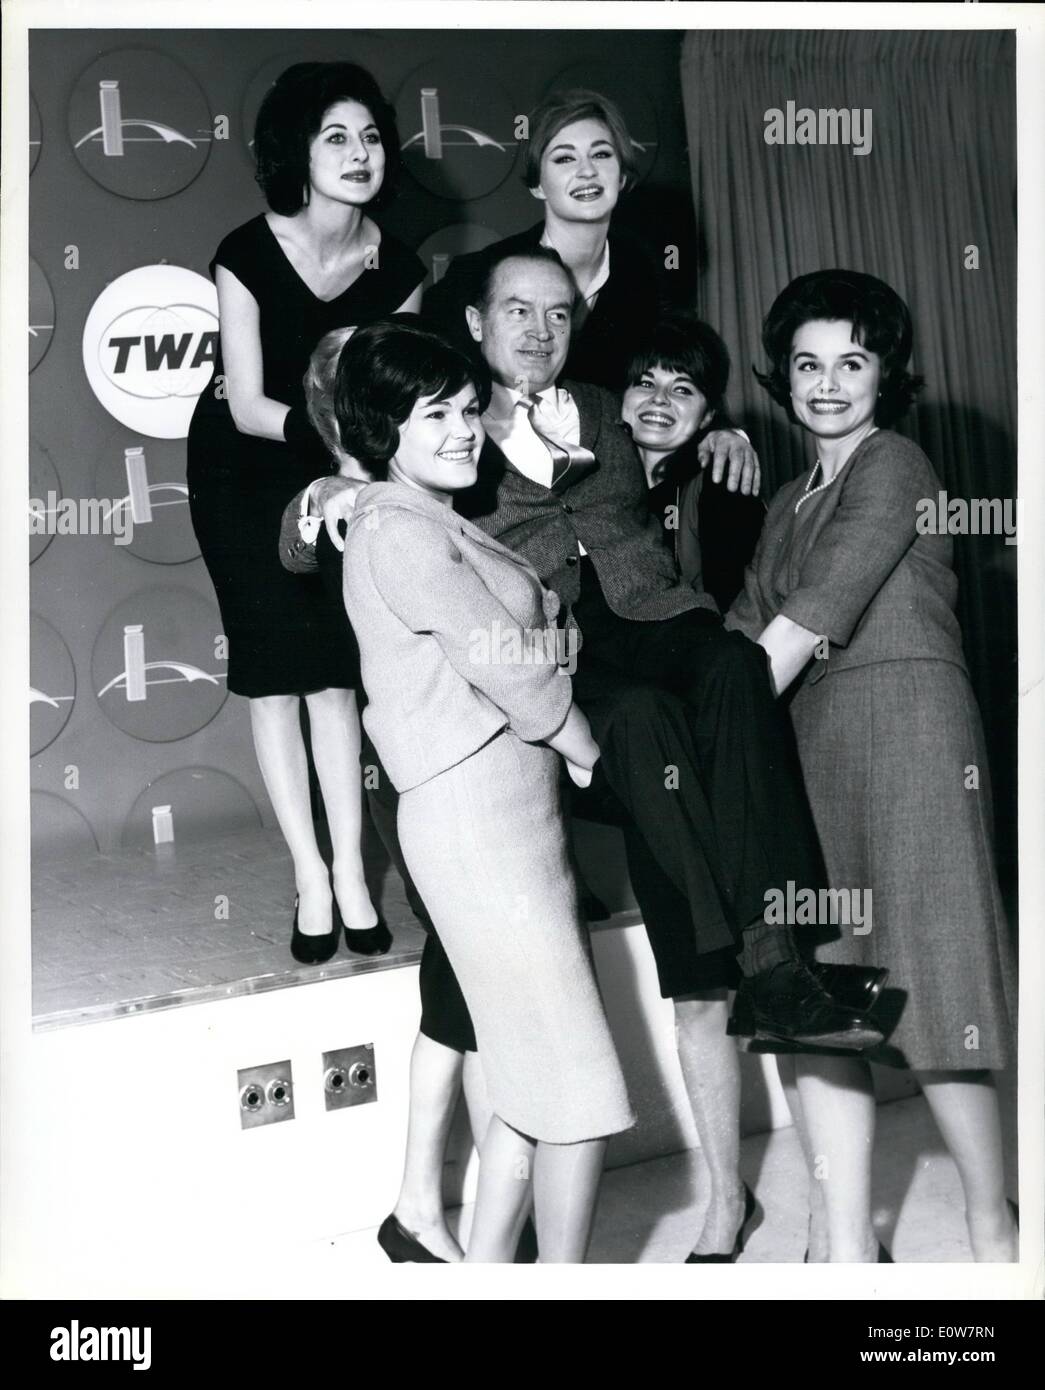 Nov. 11, 1961 - New York International Airport.... Bob Hope finds himself surrounded by N.Y. models on his arrival from London aboard a TWA Superjet. Bob just completed ''The Road to Hong Kong'' in London with Bing Crosby and on the flight across the Atlantic, saw a preview of his newest release, ''Bachelor in Paradise'', while jetting along at 30,000 feet. Quipped Bob, Here's one movie they couldn't walk out on. He will attend the film's New York premi&egrave;re. Stock Photo